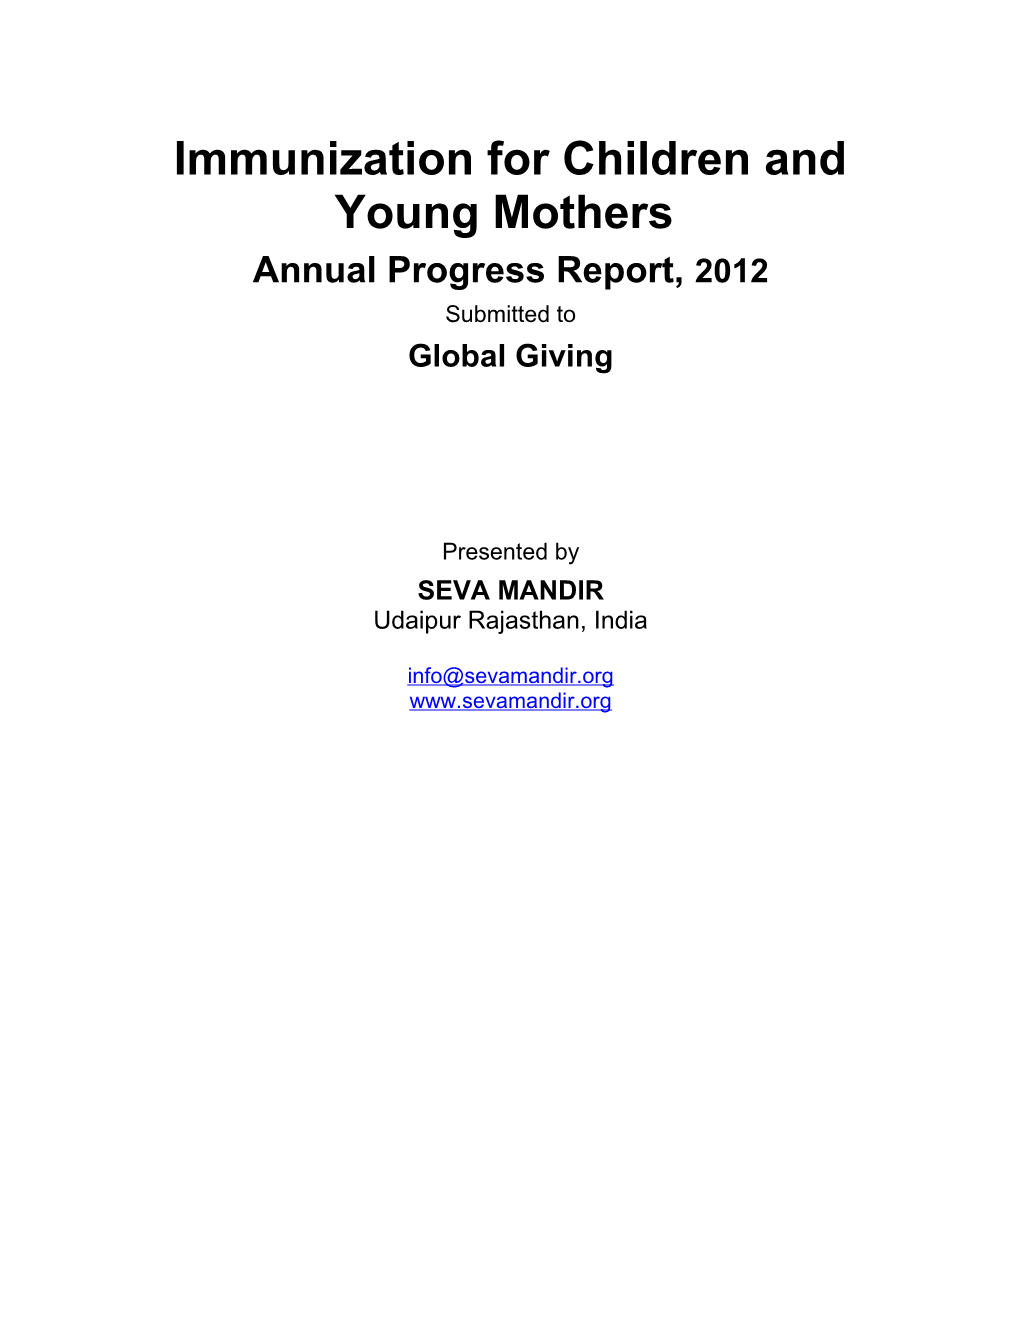 Immunization for Children and Young Mothers